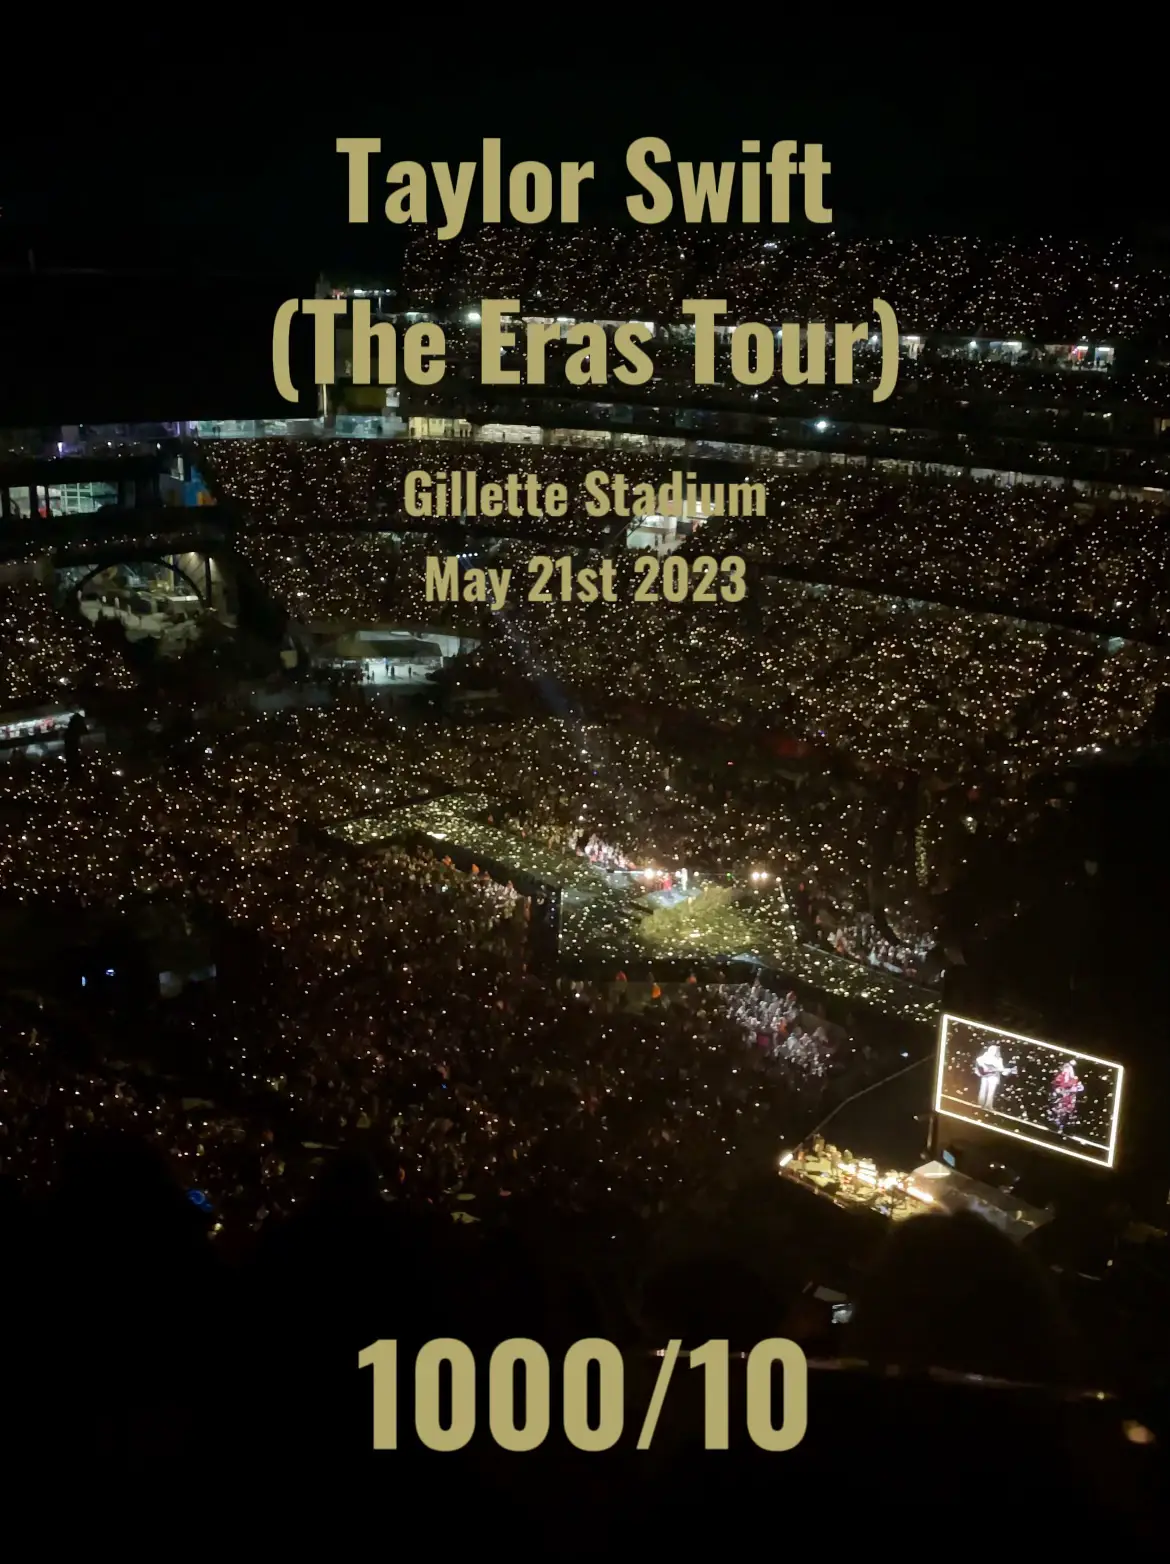  Taylor Swift is playing at a stadium with a large audience.